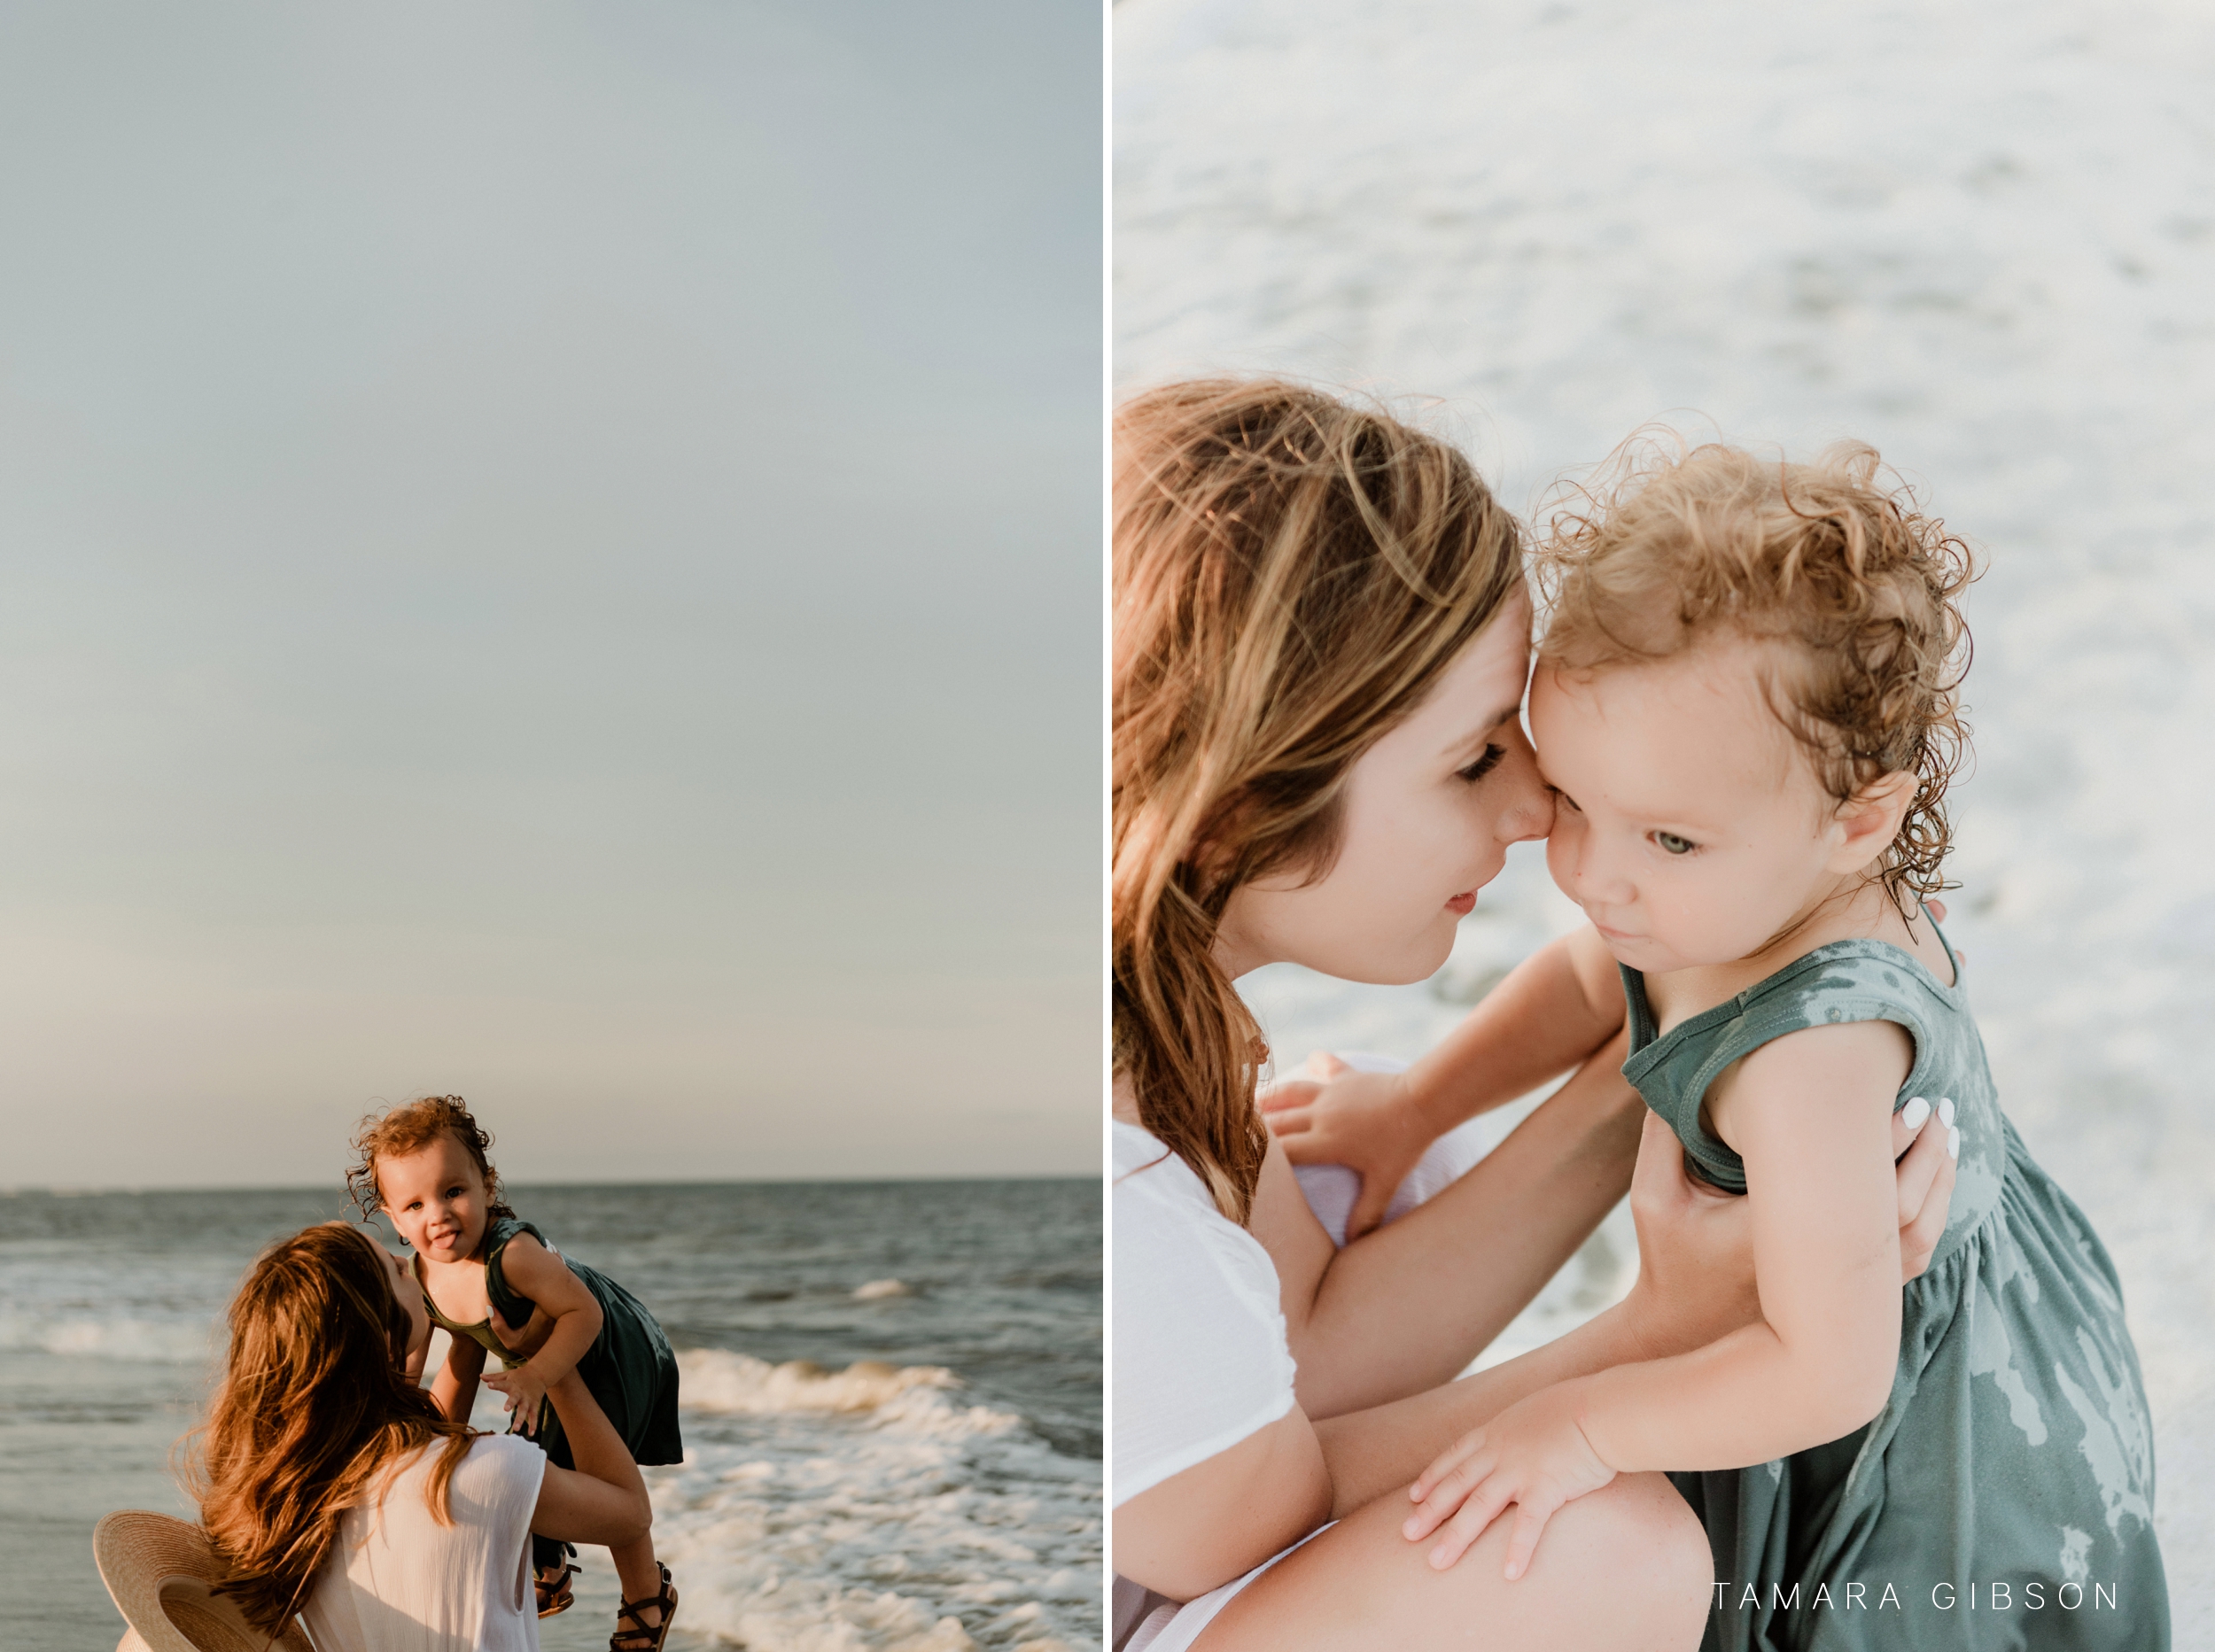 Collage of 2 pictures, Hallen wife holding daughter on beach. 